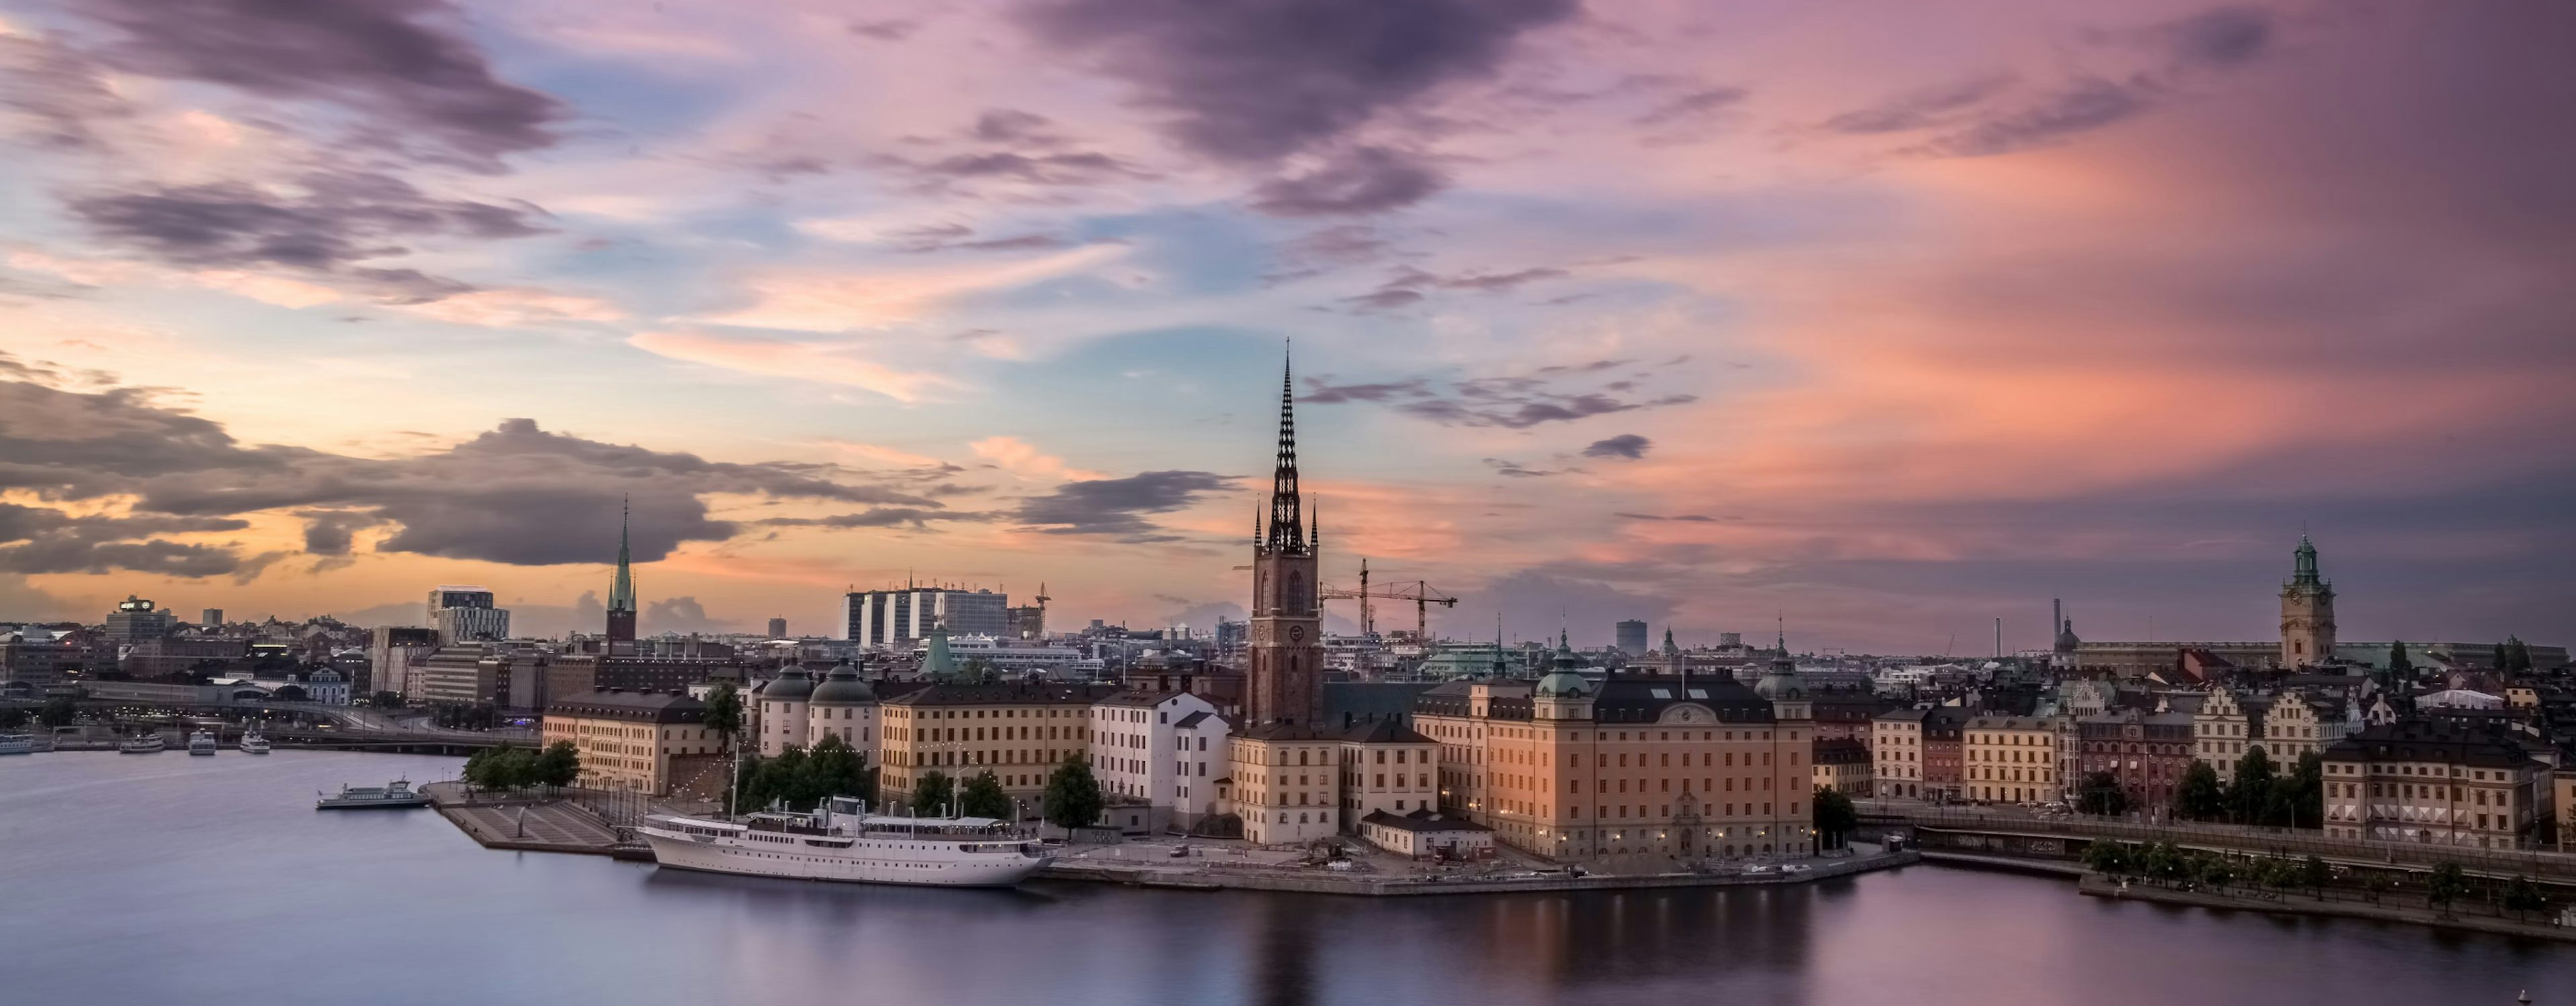 A panoramic image of the Stockholm city skyline at sunset with a pastel-colored sky and buildings reflected in the calm water